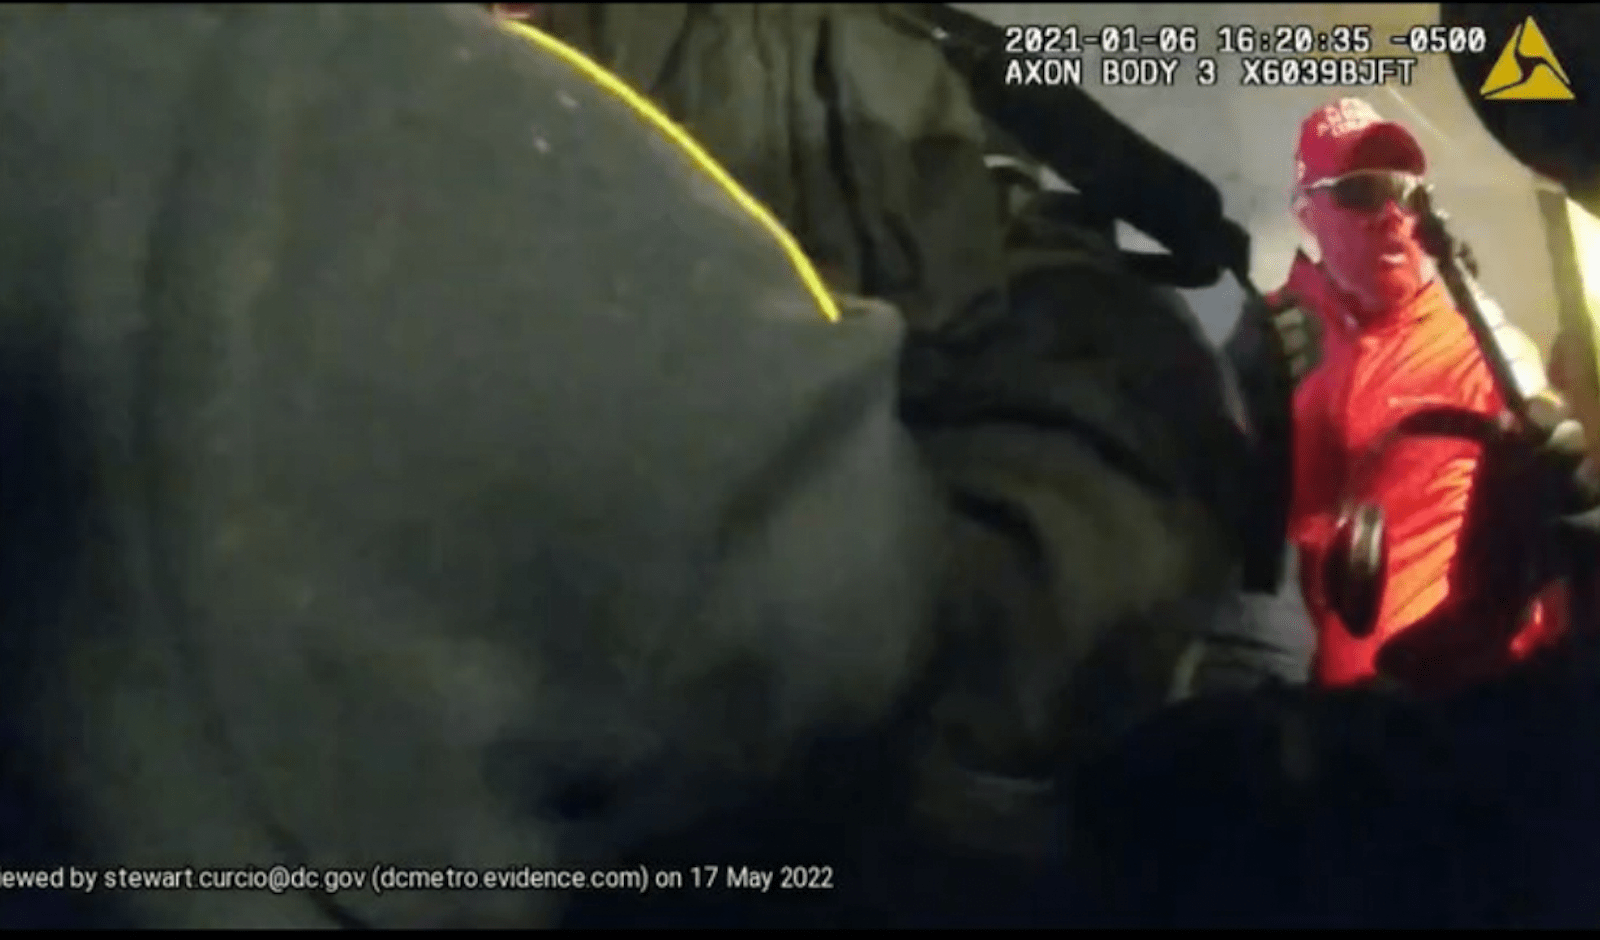 Still from a police body camera showing Rally Runner at the Jan. 6 riot